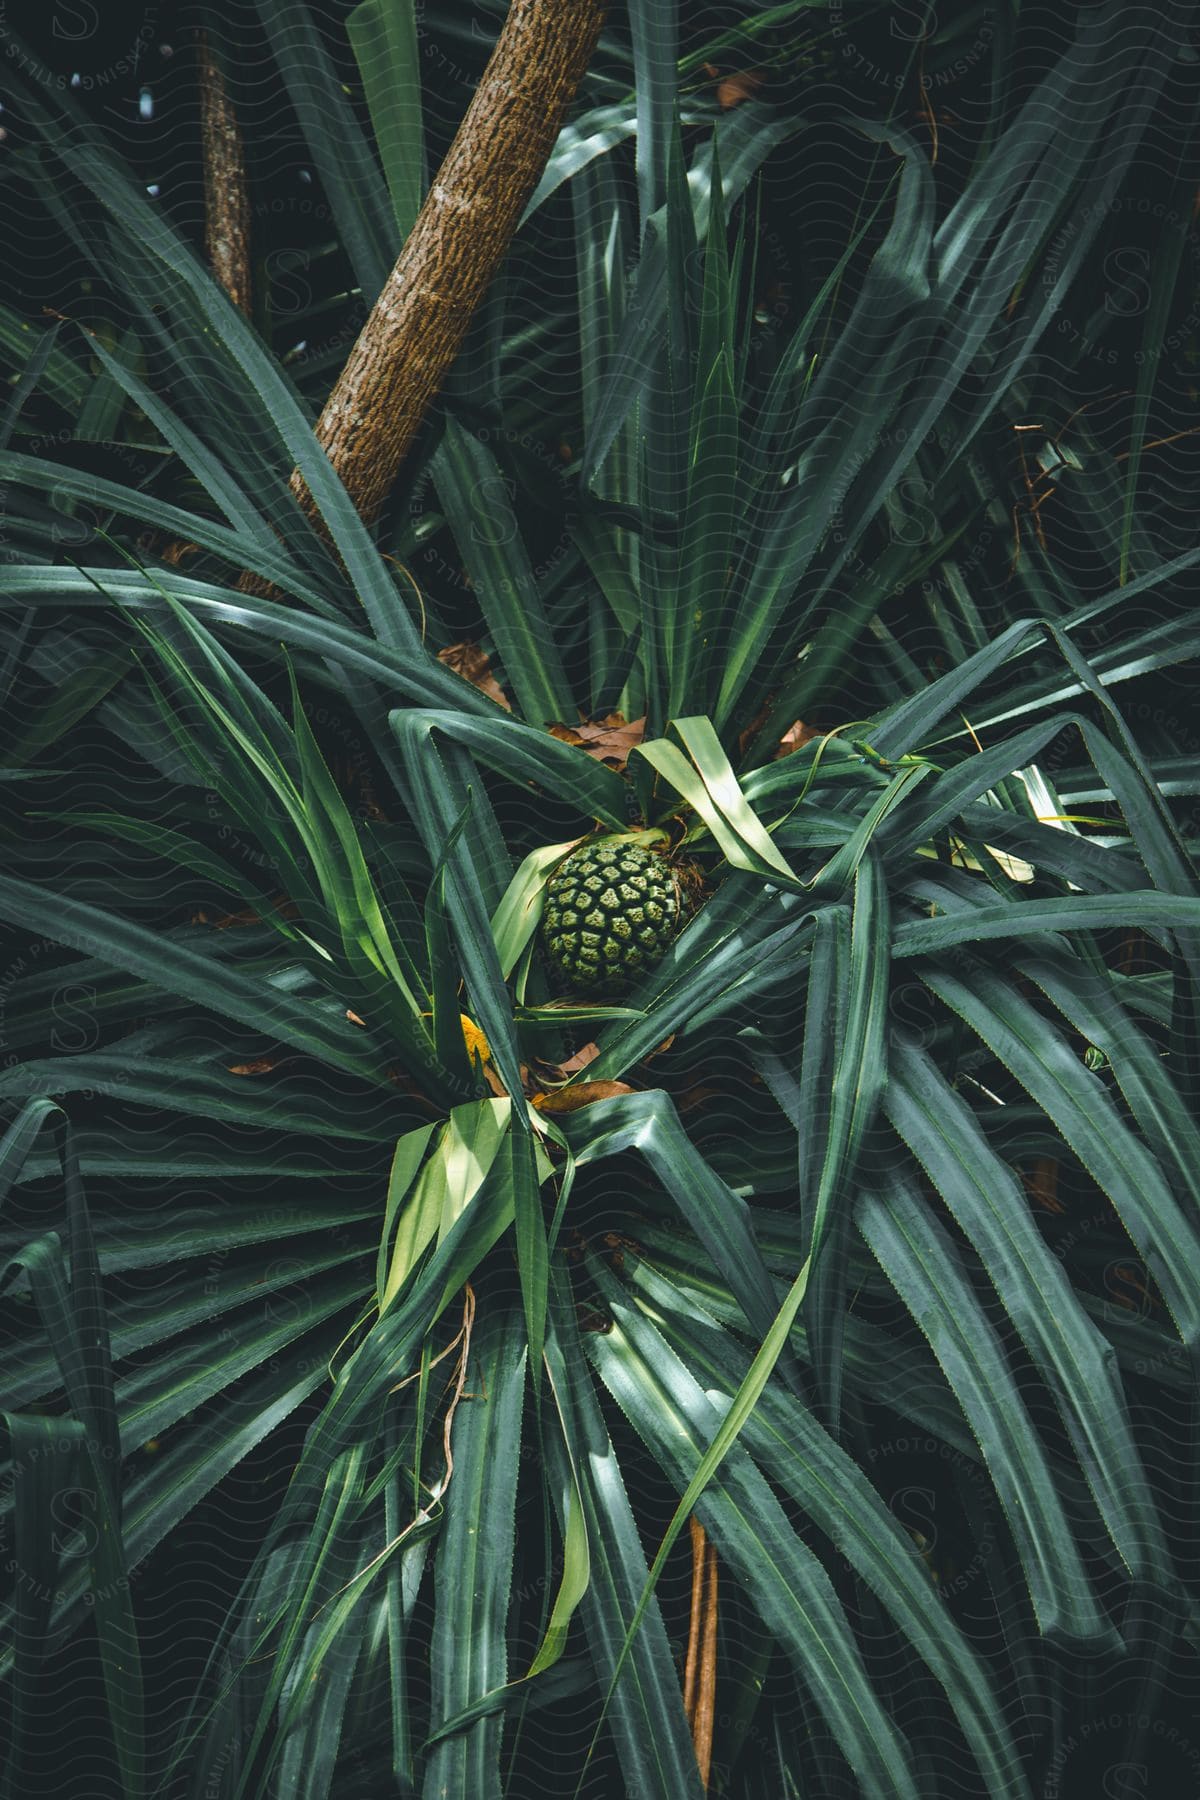 A baby pineapple growing on a pineapple plant in the tropical forest.